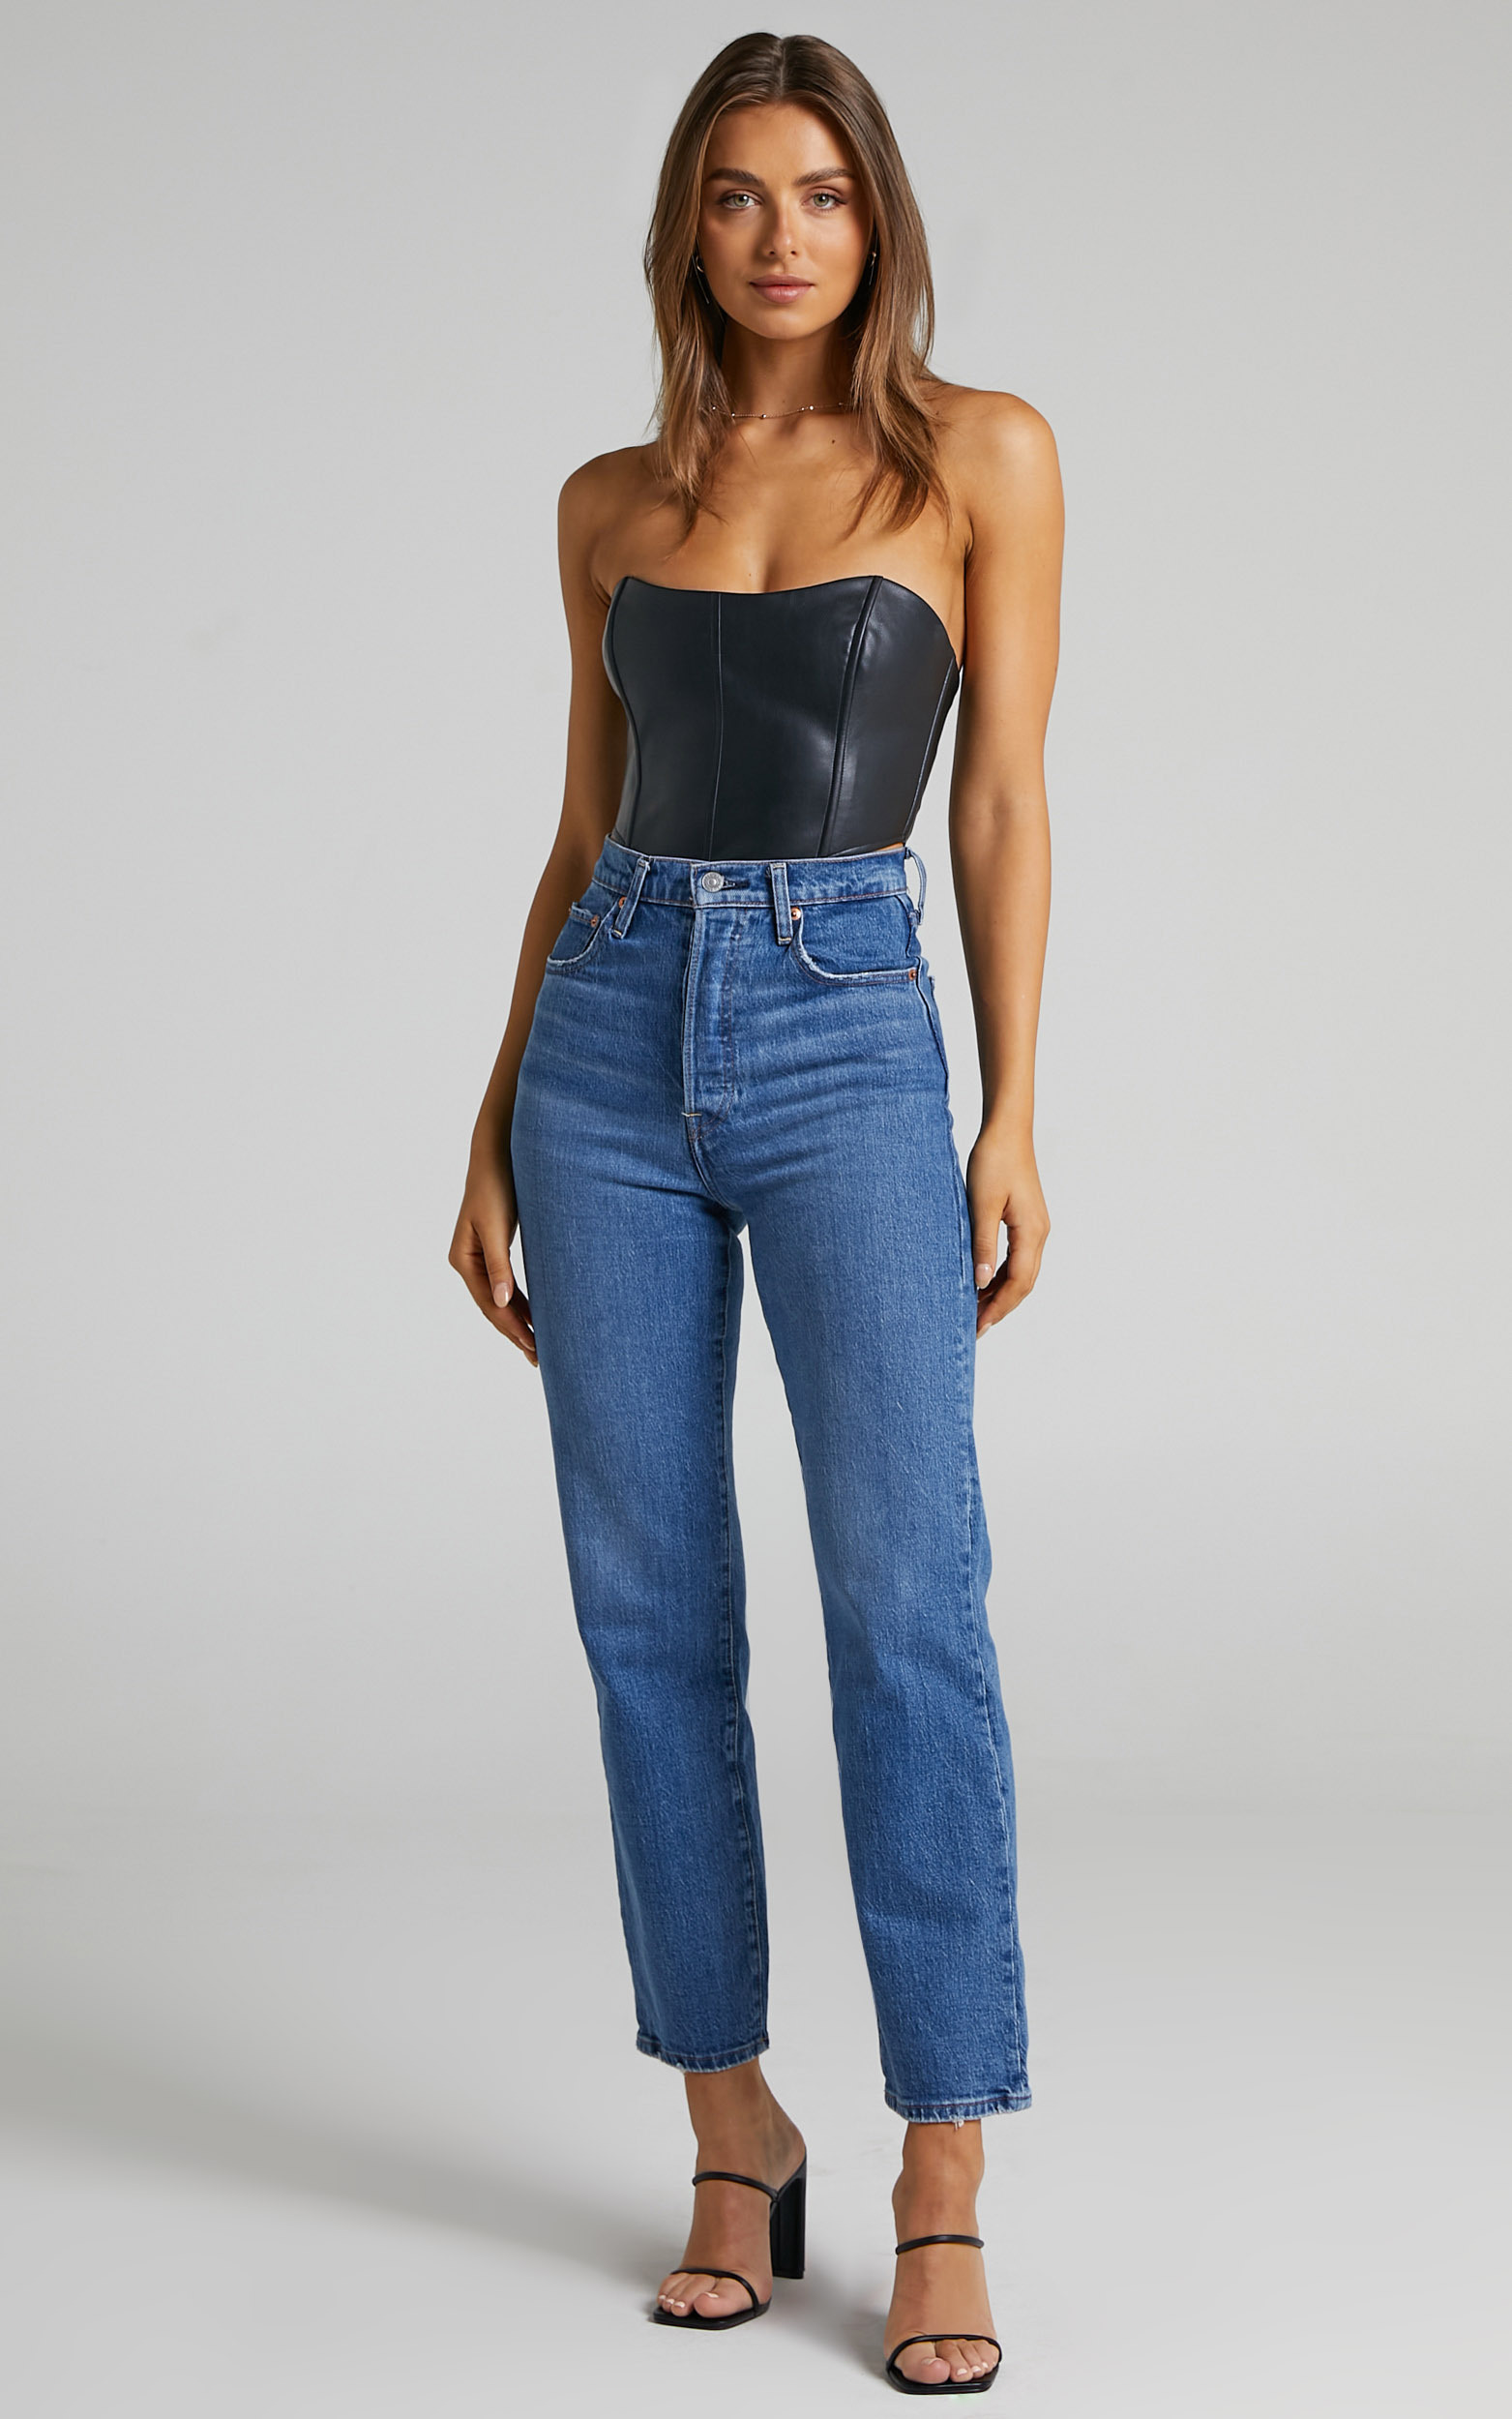 Levi's - Ribcage Straight Ankle Jeans in Jazz Jive Together | Showpo USA